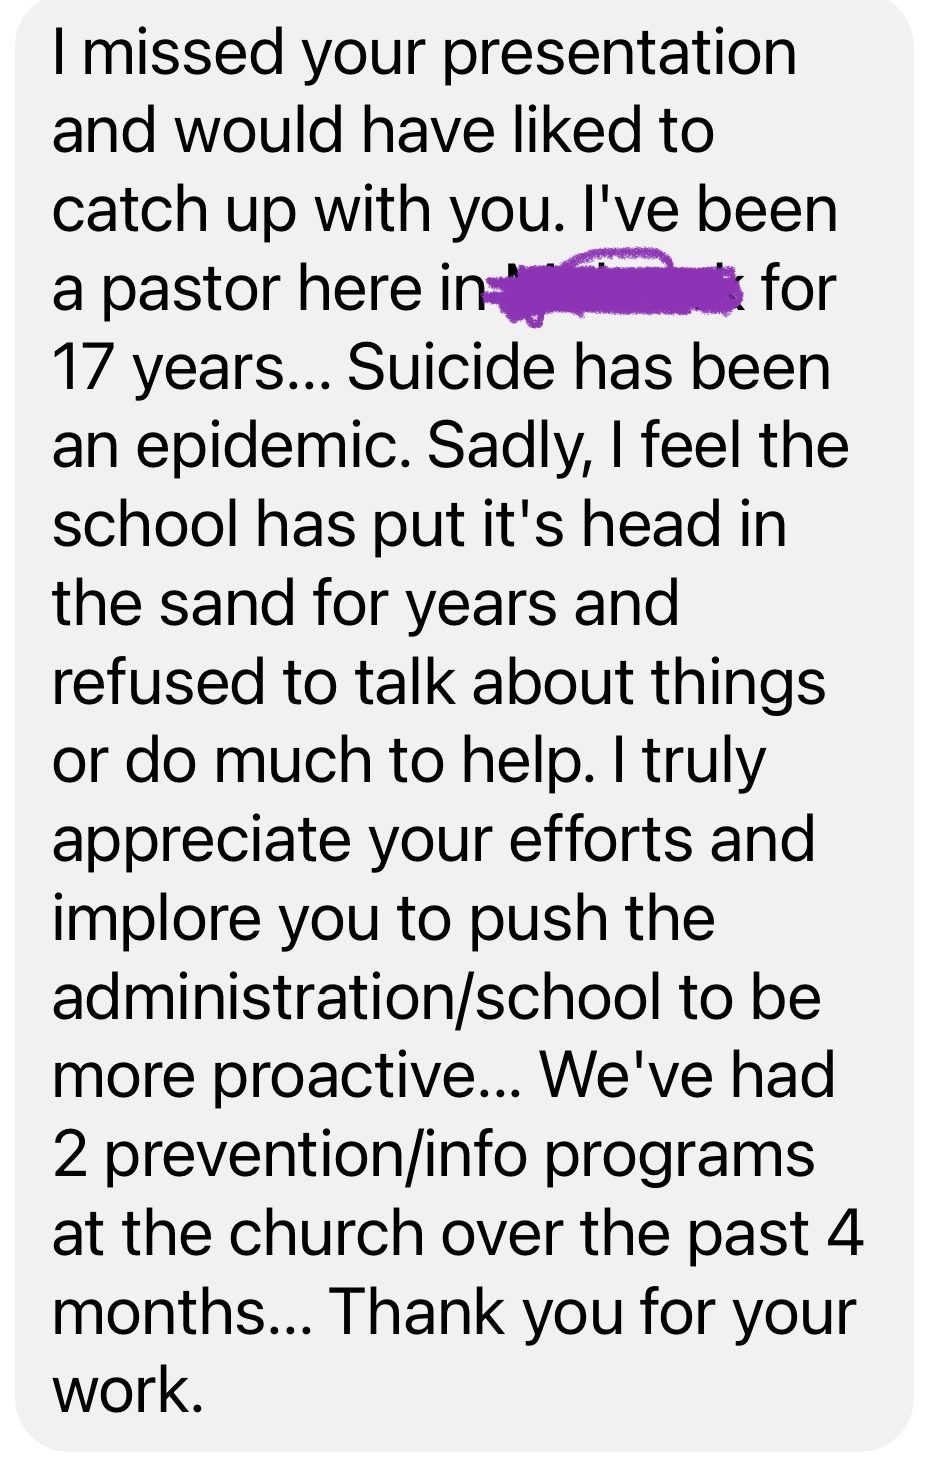 Pastor and the Church expressing their concern for schools and how they handle teen suicide.